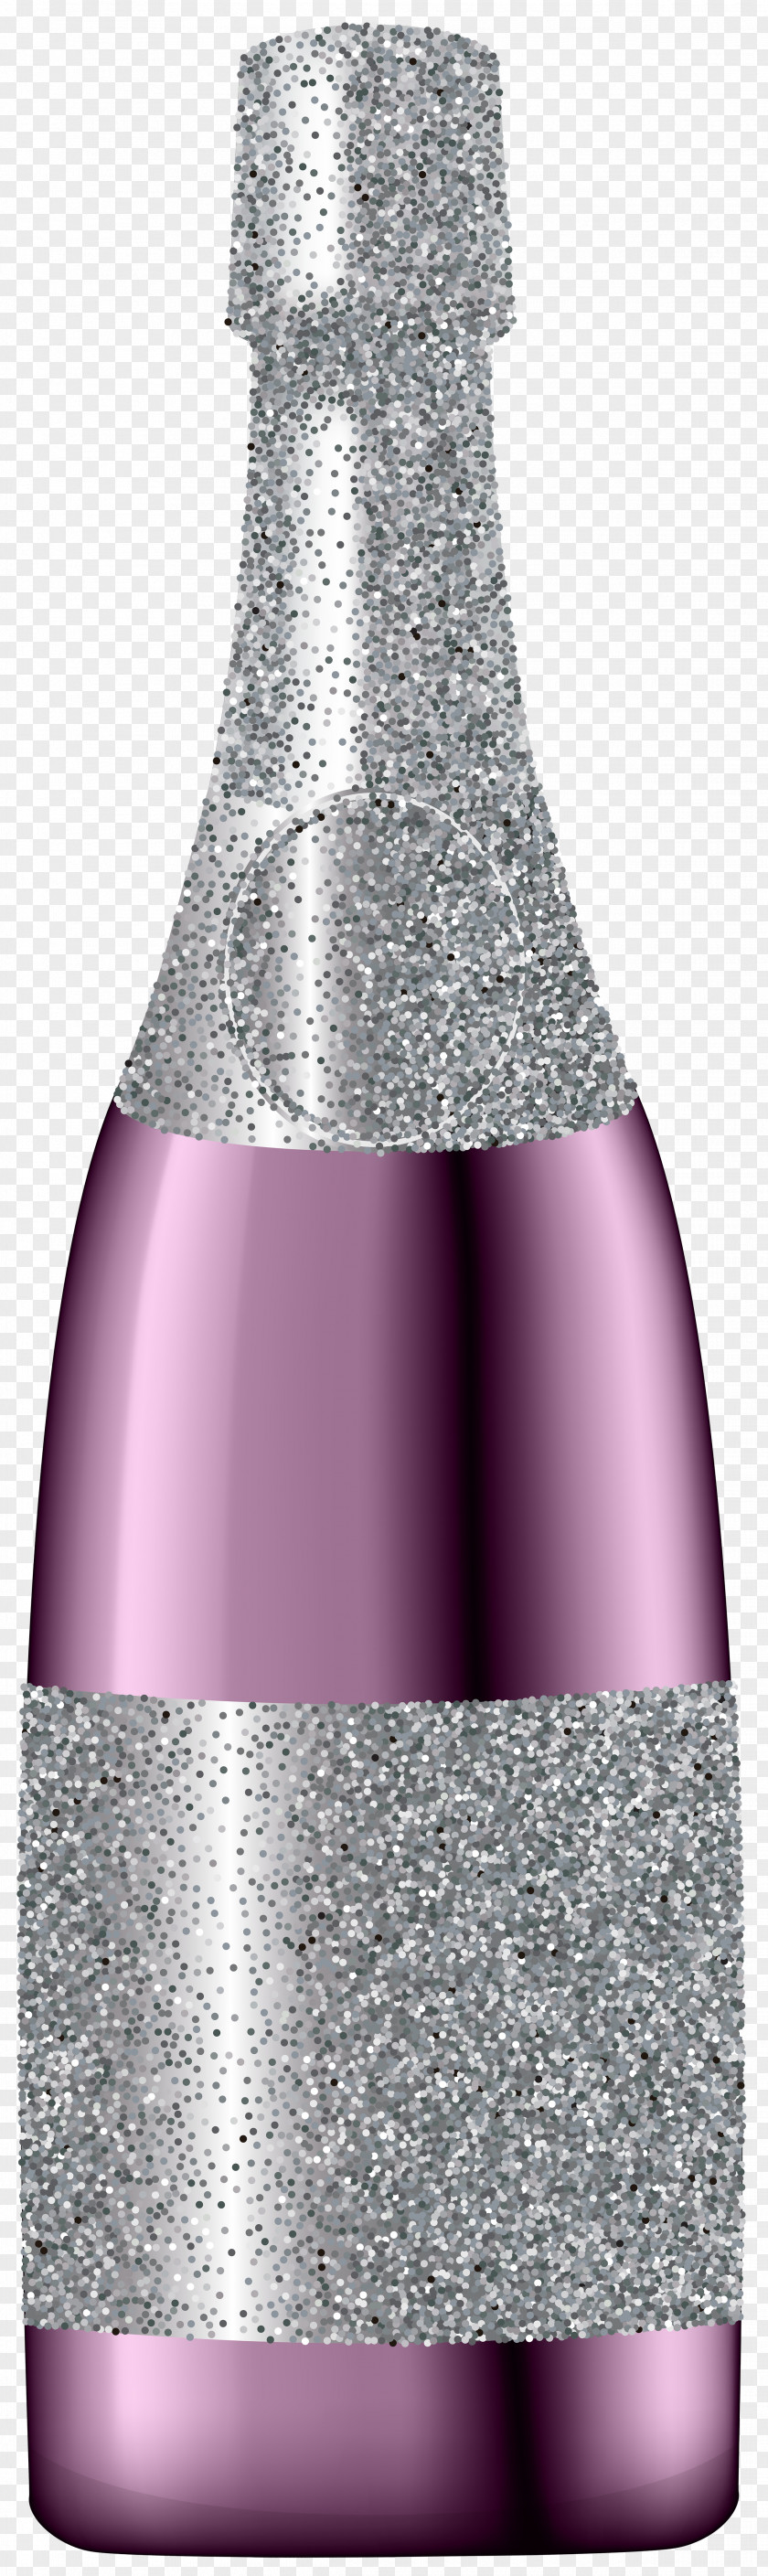 Glitter Champagne Bottle Pink Clip Art Image Red Wine Cocktail PNG